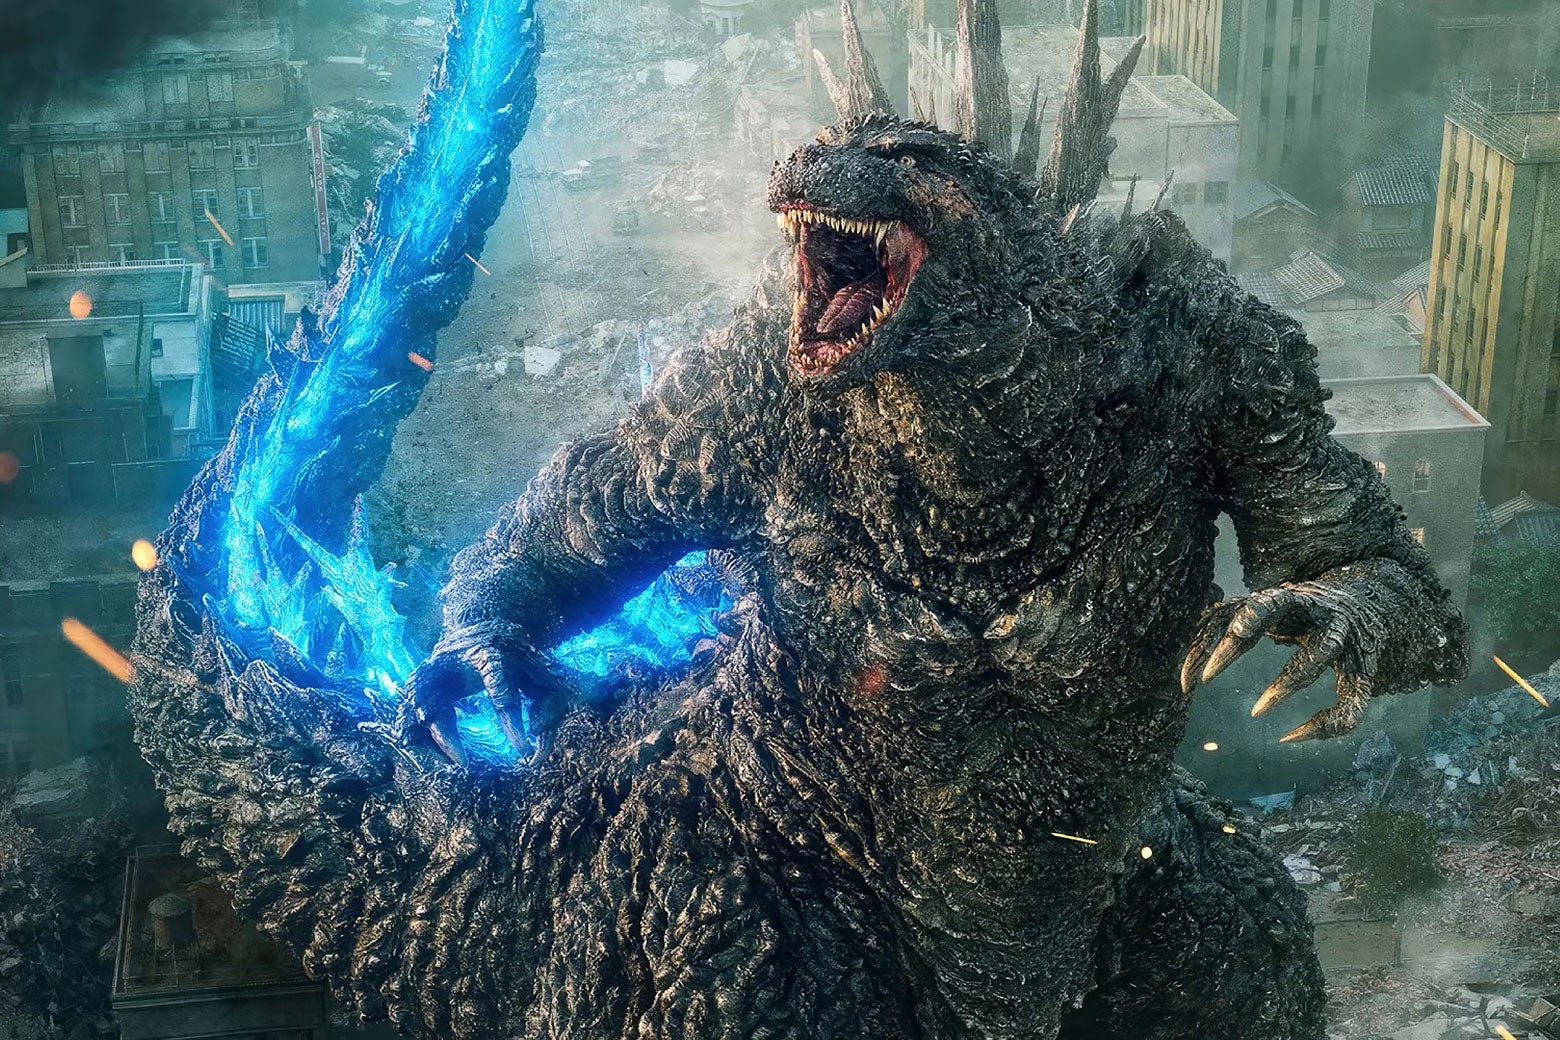 A still image of the titular monster attacking a city in Godzilla Minus One.